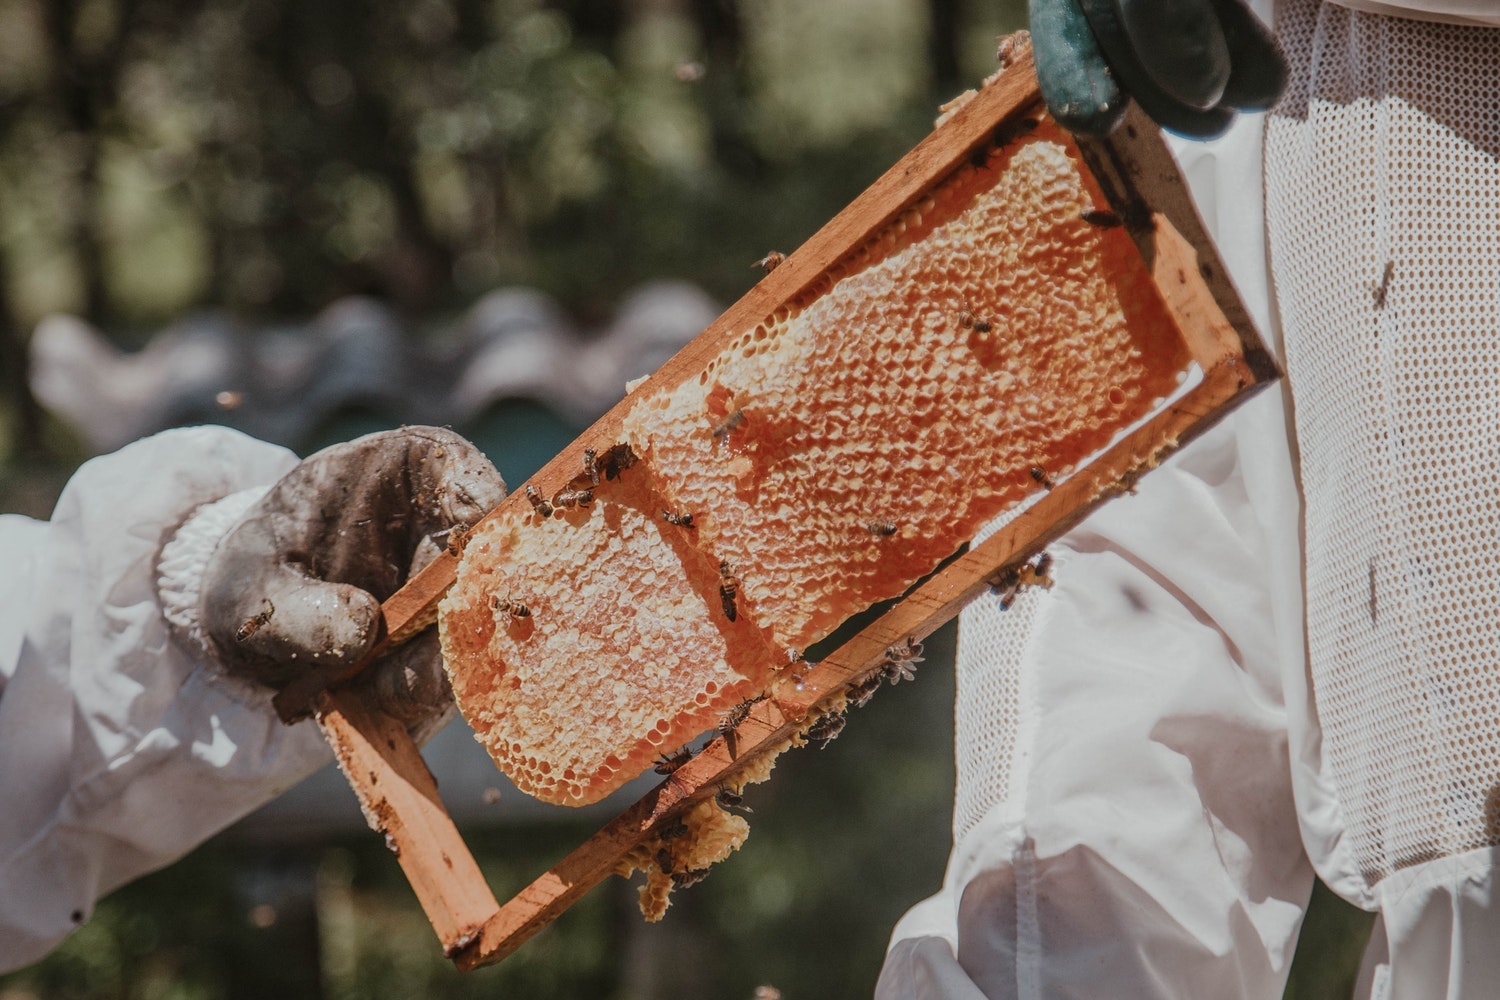 Removal of live honey bees in Temecula